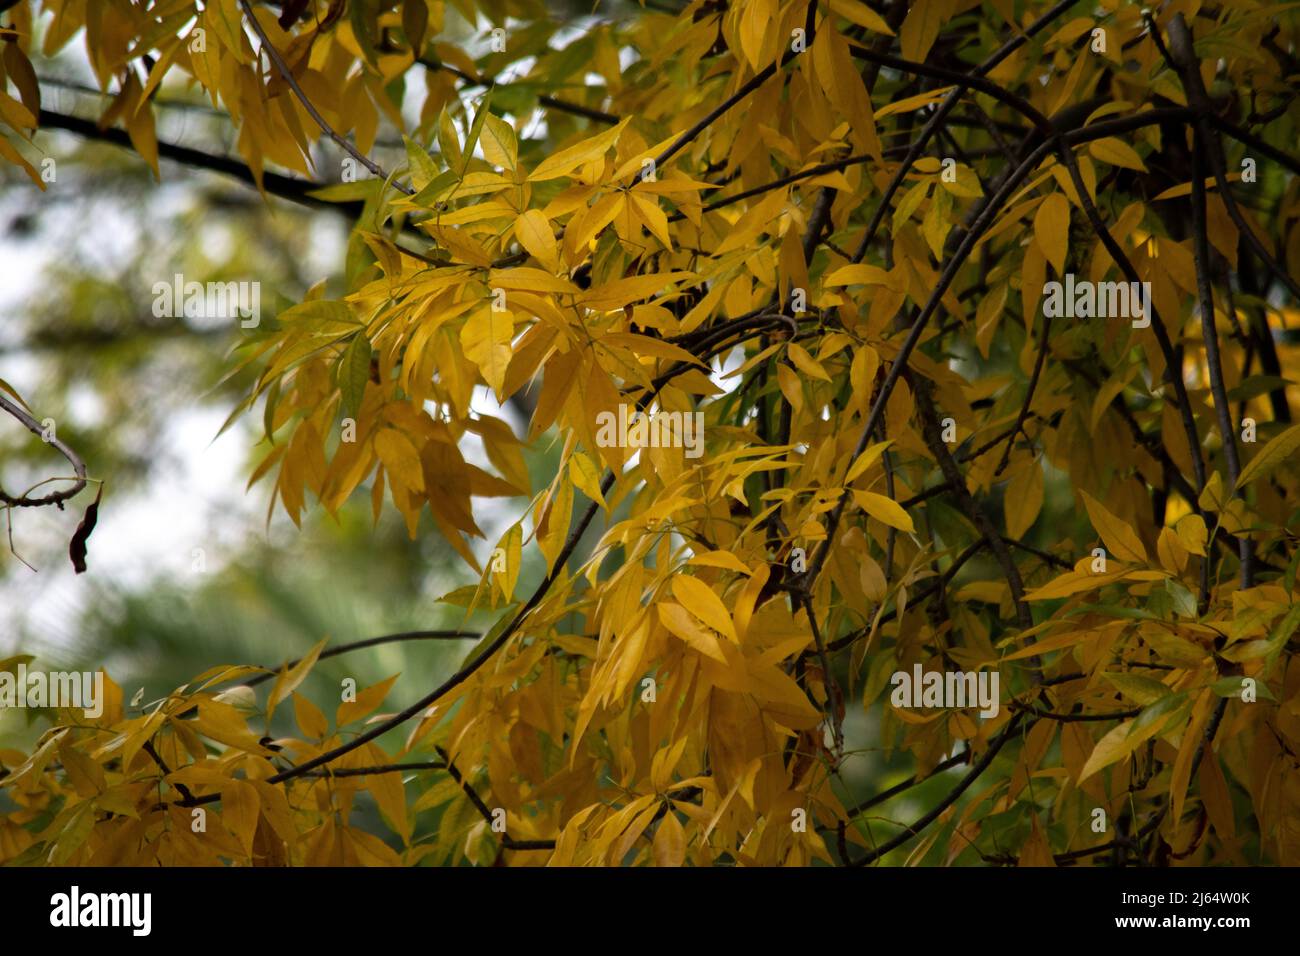 yellow leaves of a tree in autumn Stock Photo